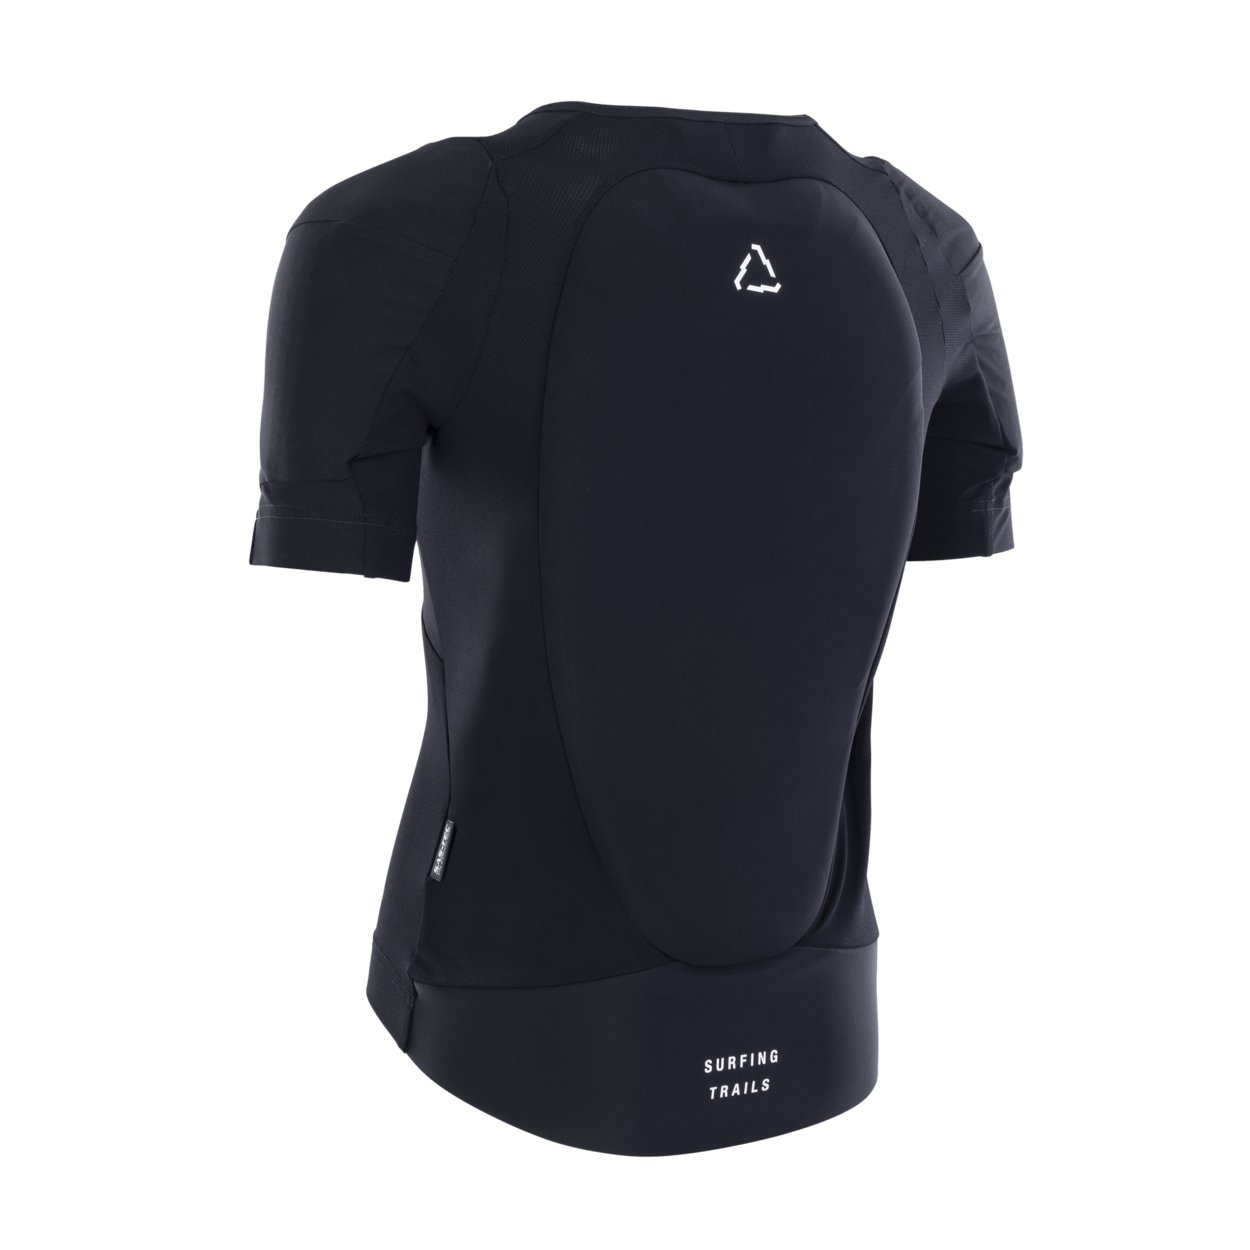 ION MTB Protection Shirt Amp Short-Sleeve Youth 2024 - Worthing Watersports - 9010583174884 - Body Armor - ION Bike